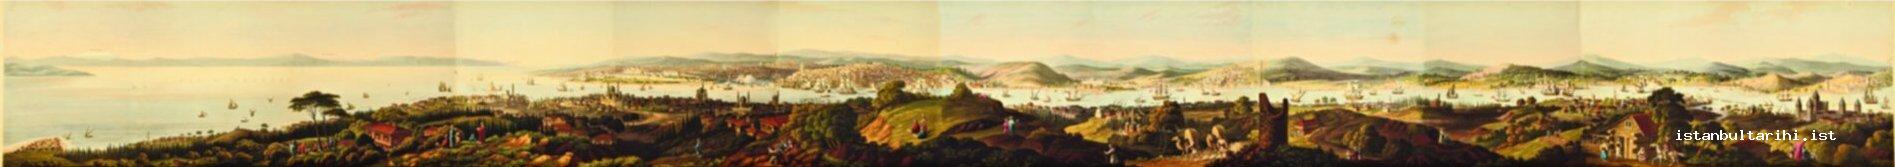 45- Panoramic view of Istanbul: From islands to Anatolian and Rumelian Castles (<em>Panorama of Constantinople</em>, London, 1851)